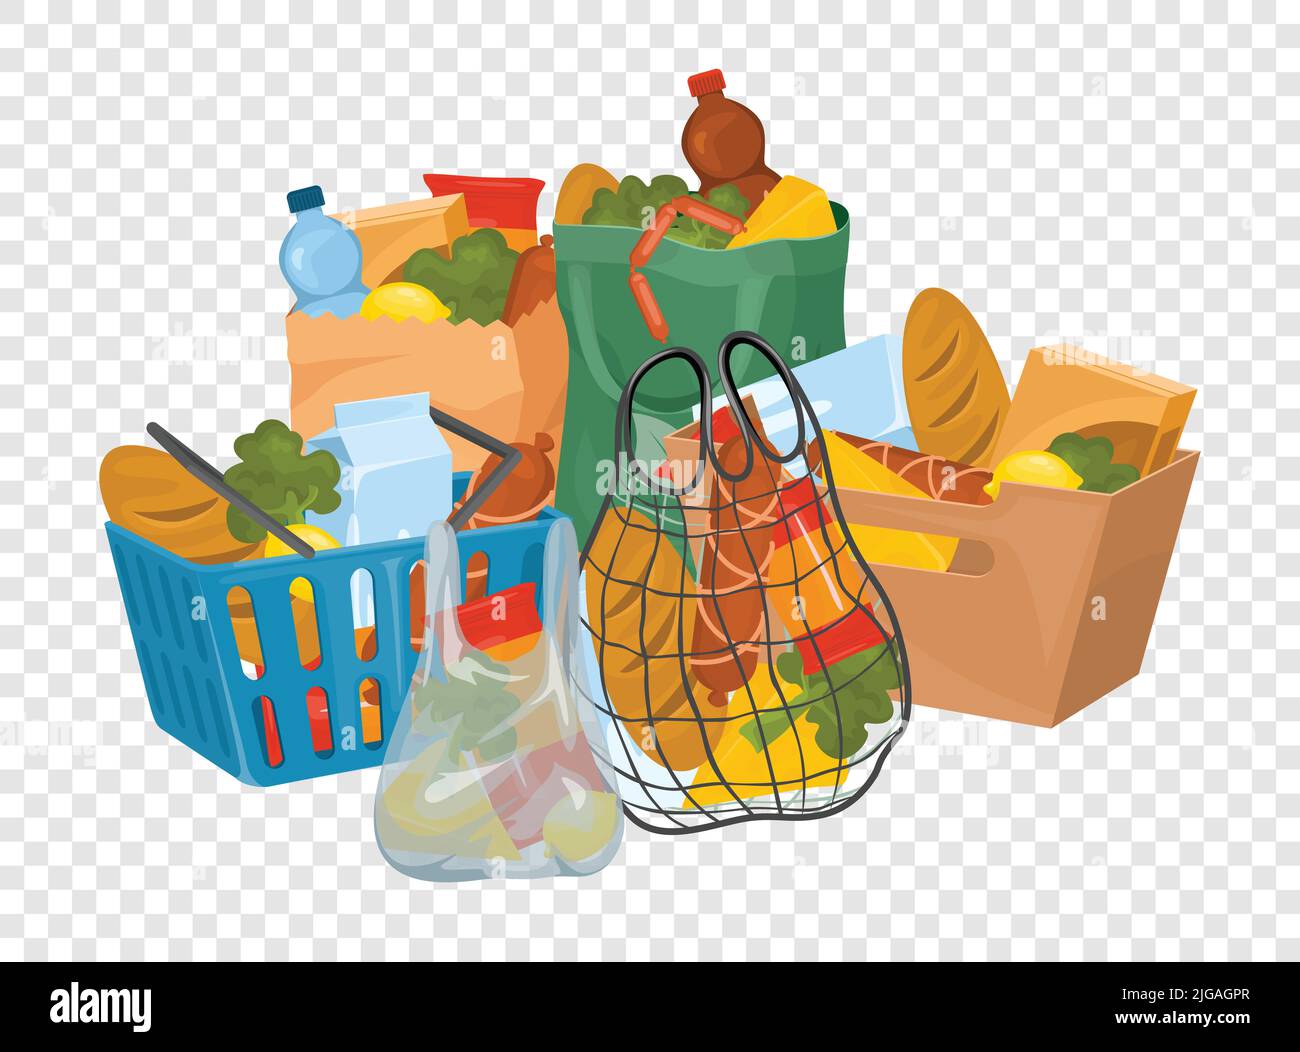 Free Vector  Shopping bag basket composition with isolated image of food  products in paper bag